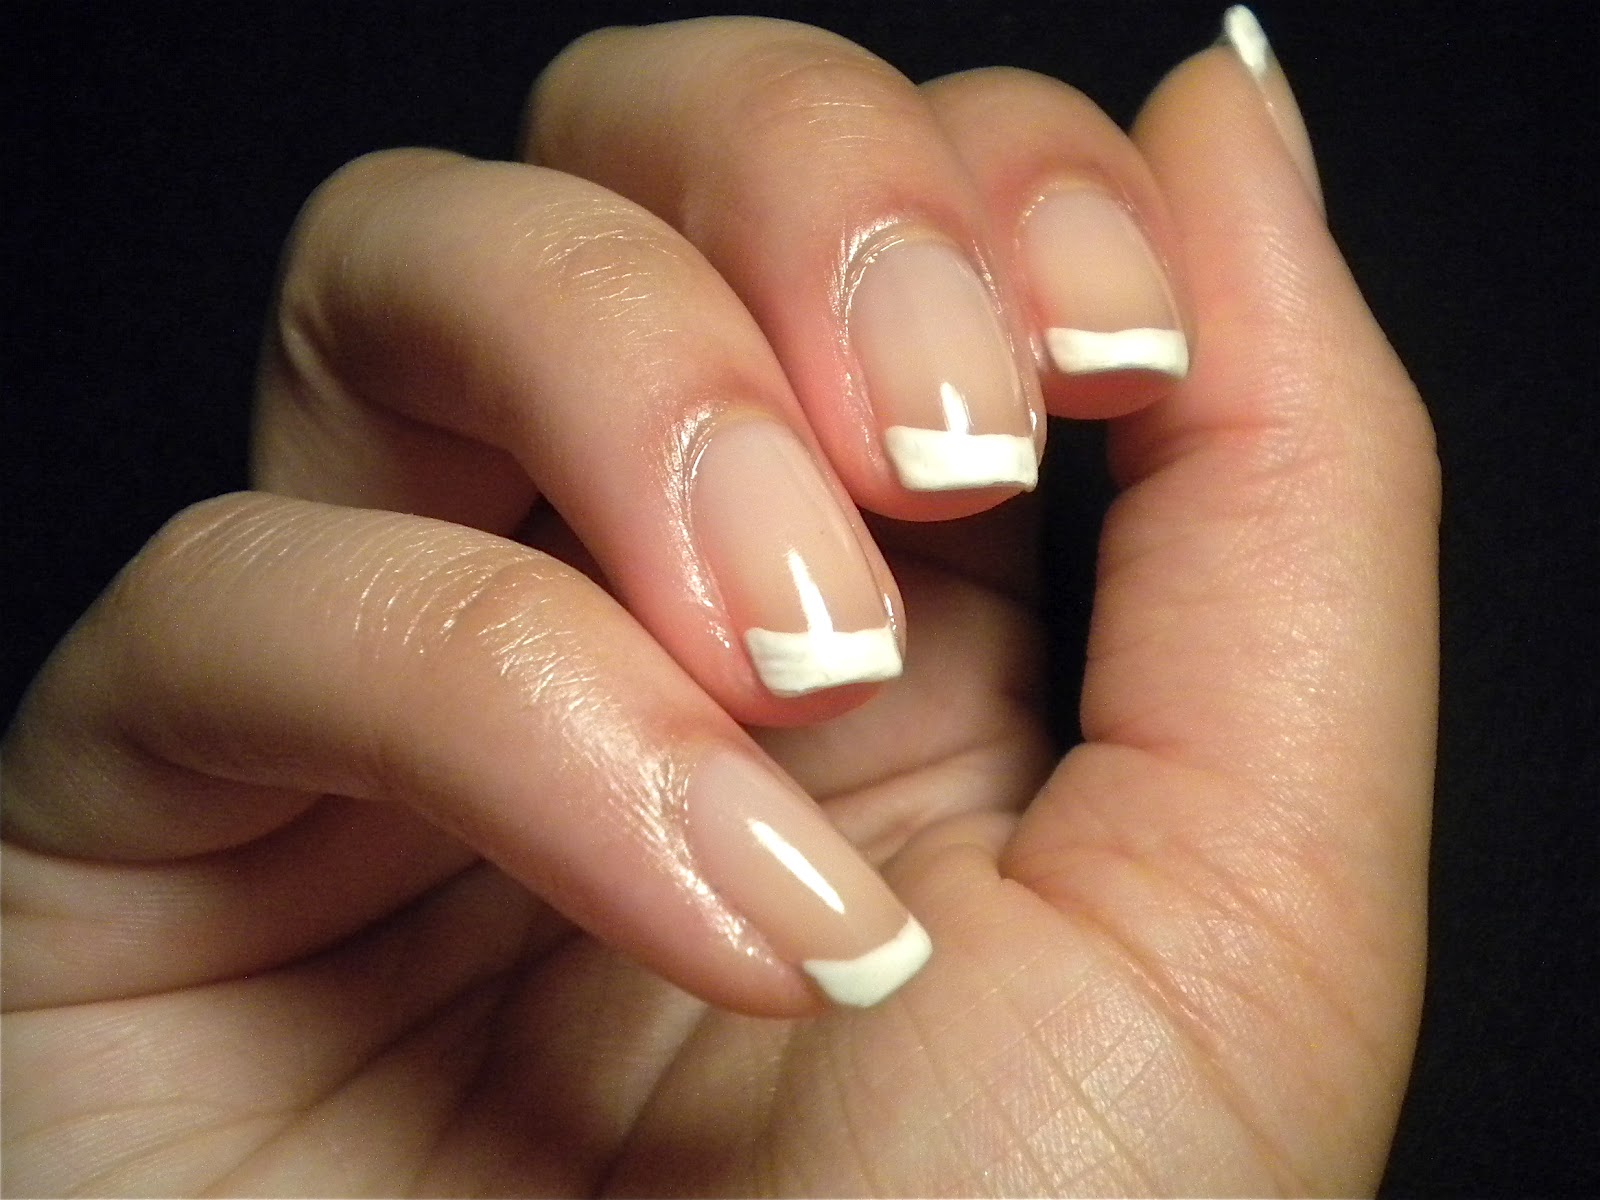 3. Quick French Manicure Ideas - wide 3